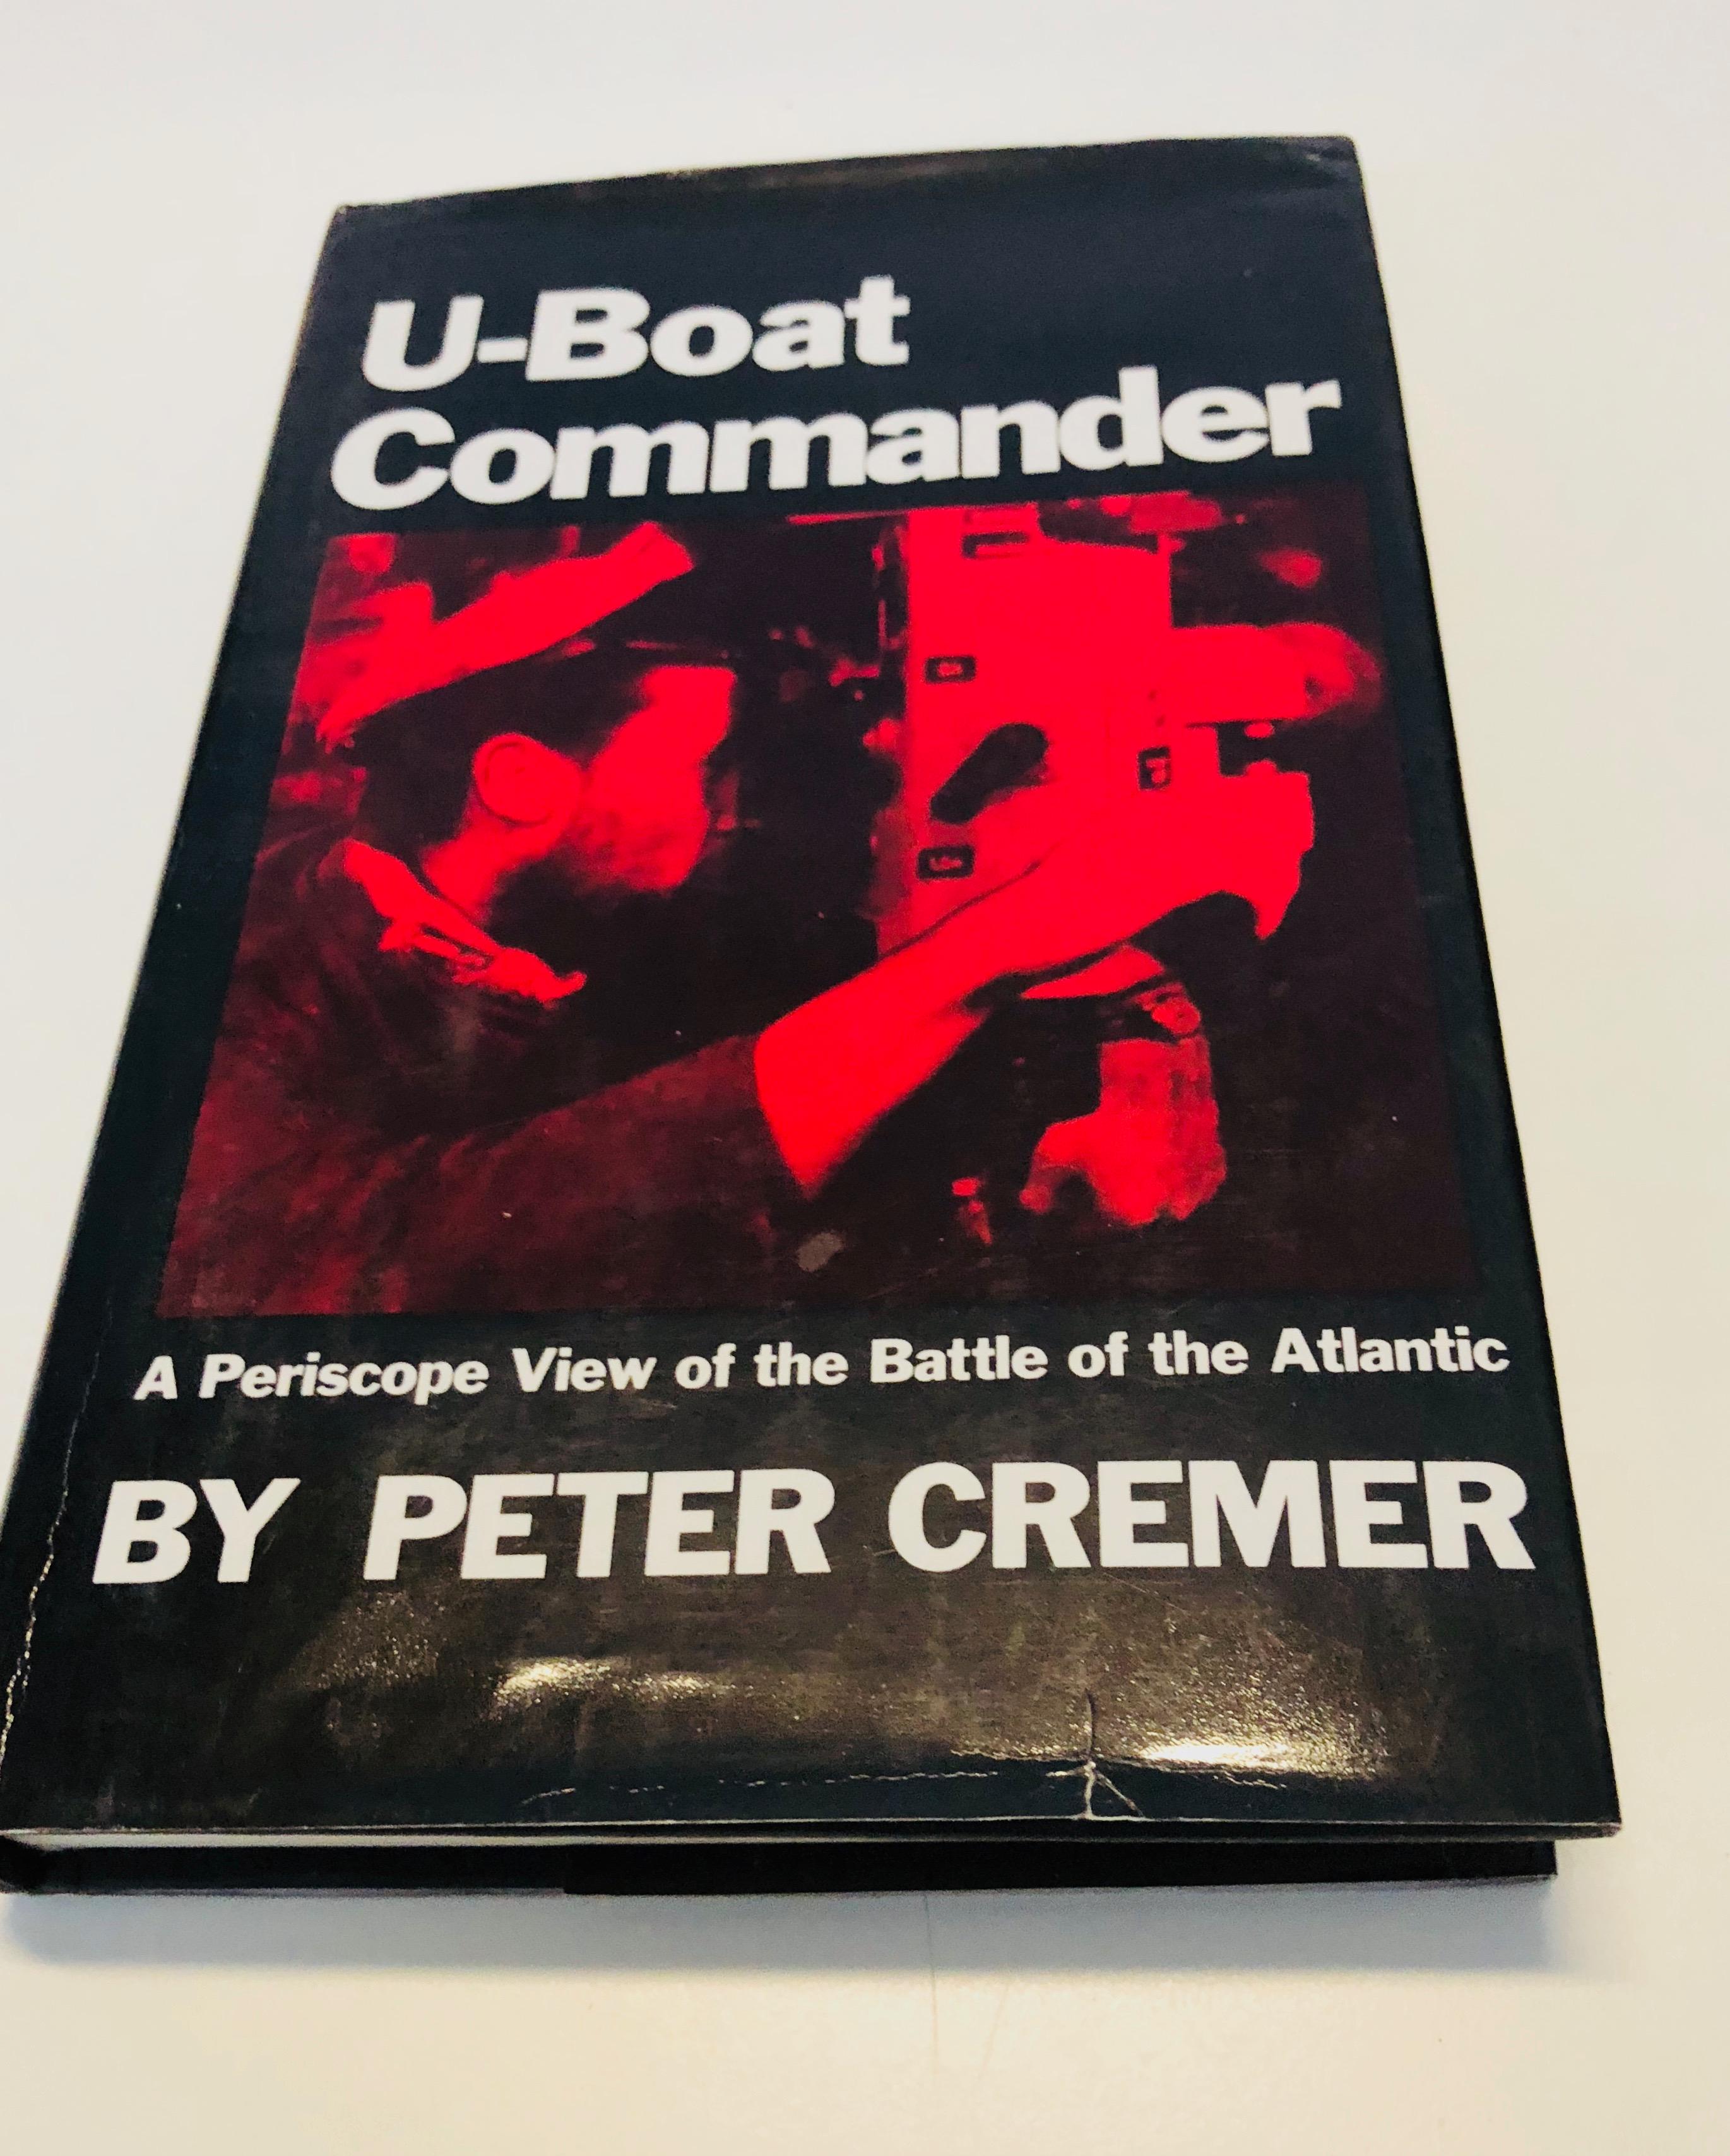 U-BOAT Commander by Peter Cremer: A PERISCOPE VIEW OF THE BATTLE OF THE ATLANTIC